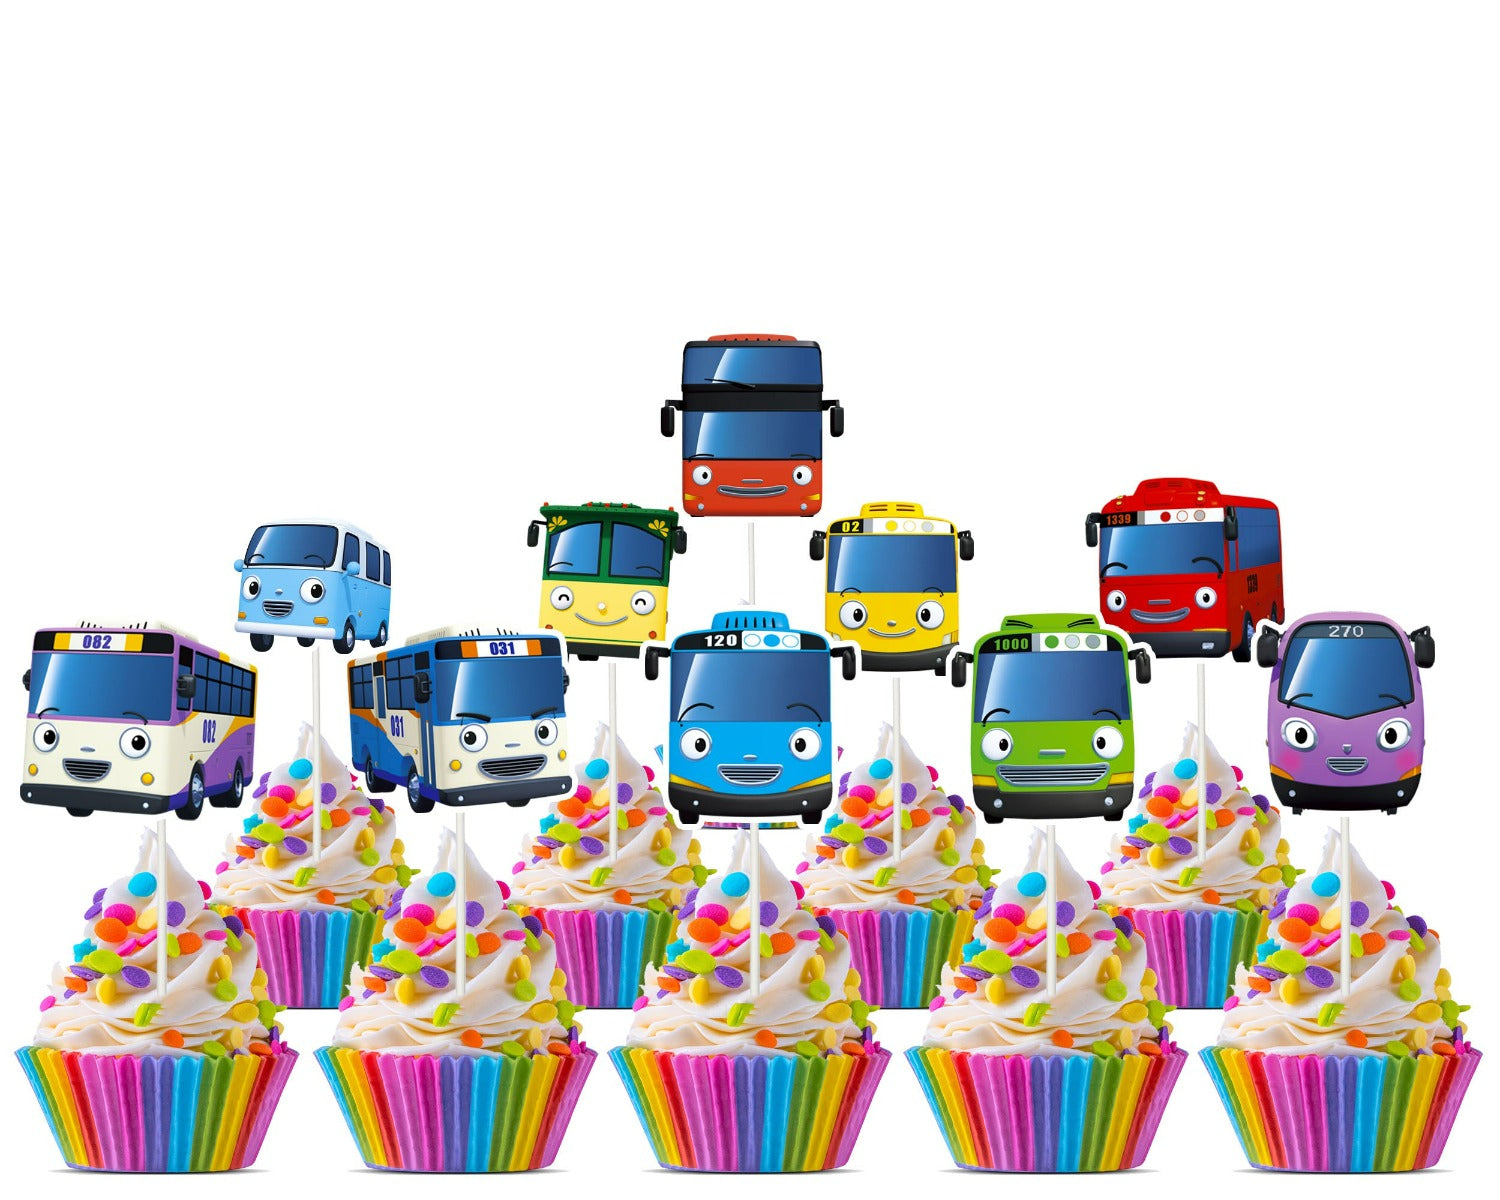 Tayo the Little Bus - Set of 10 Cupcake Toppers for Joyful Birthday Parties